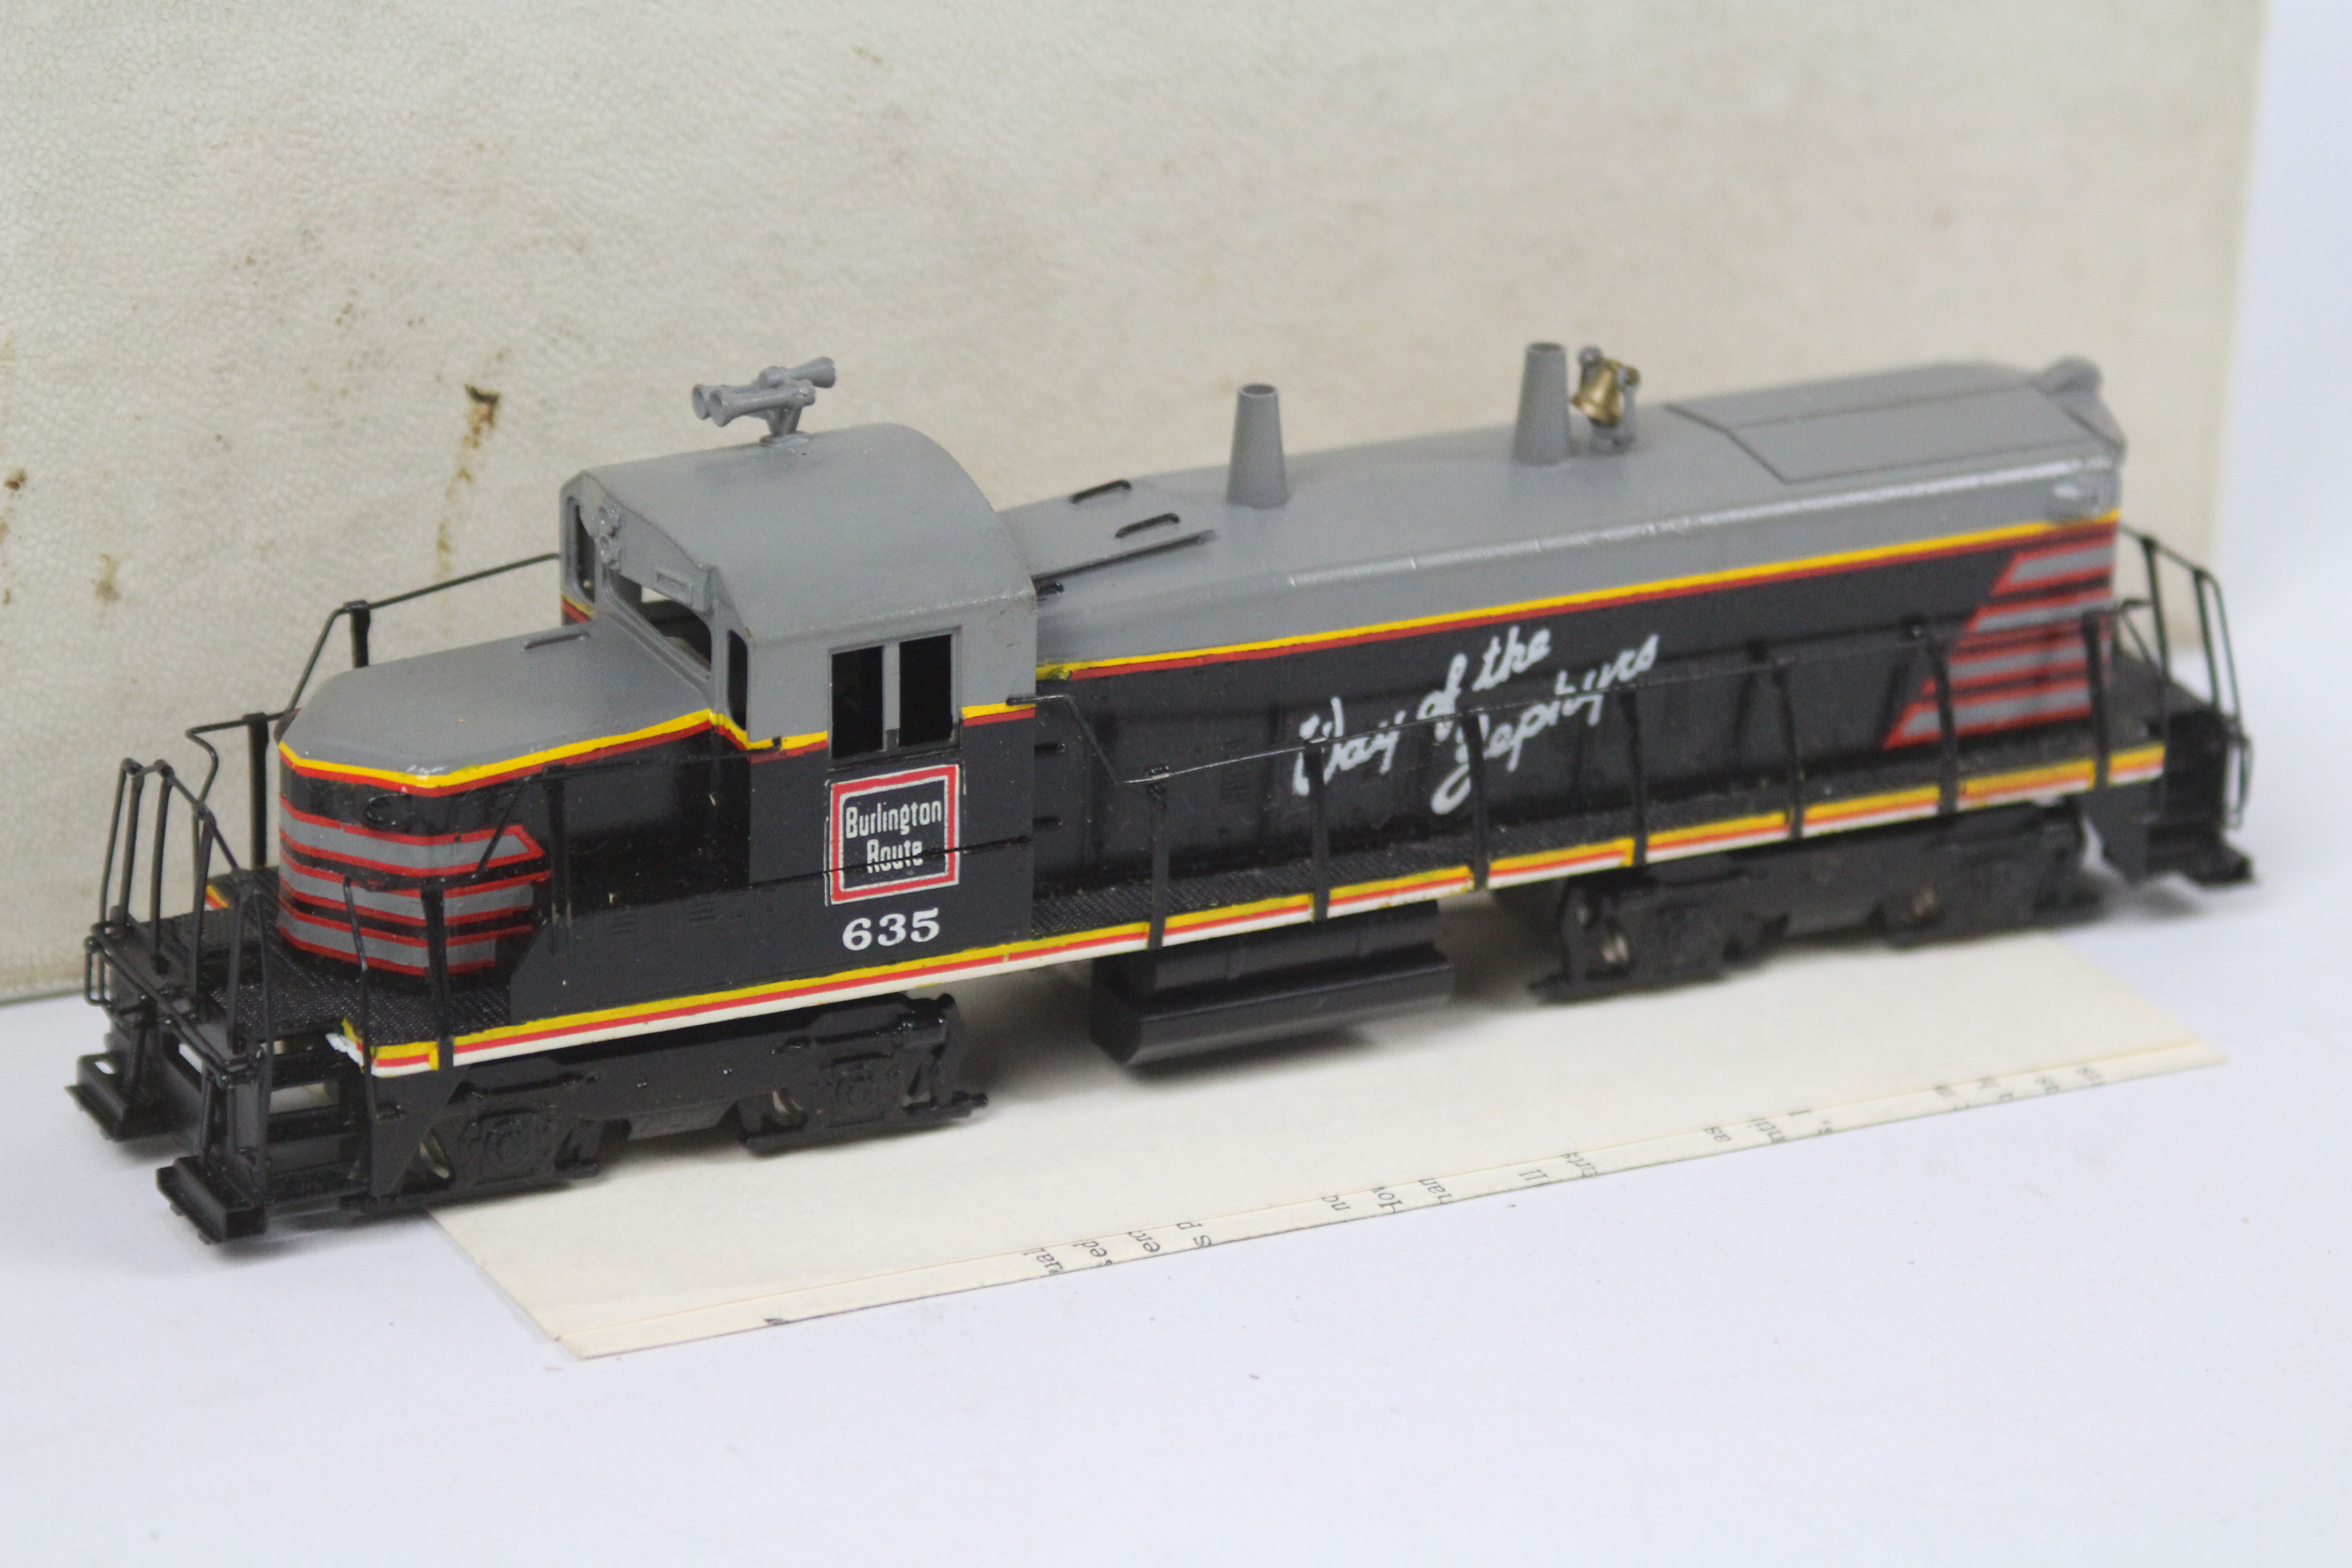 Trains Incorporated - A boxed Trains Incorporated HO gauge EMD RS-1325 brass American diesel - Image 2 of 3